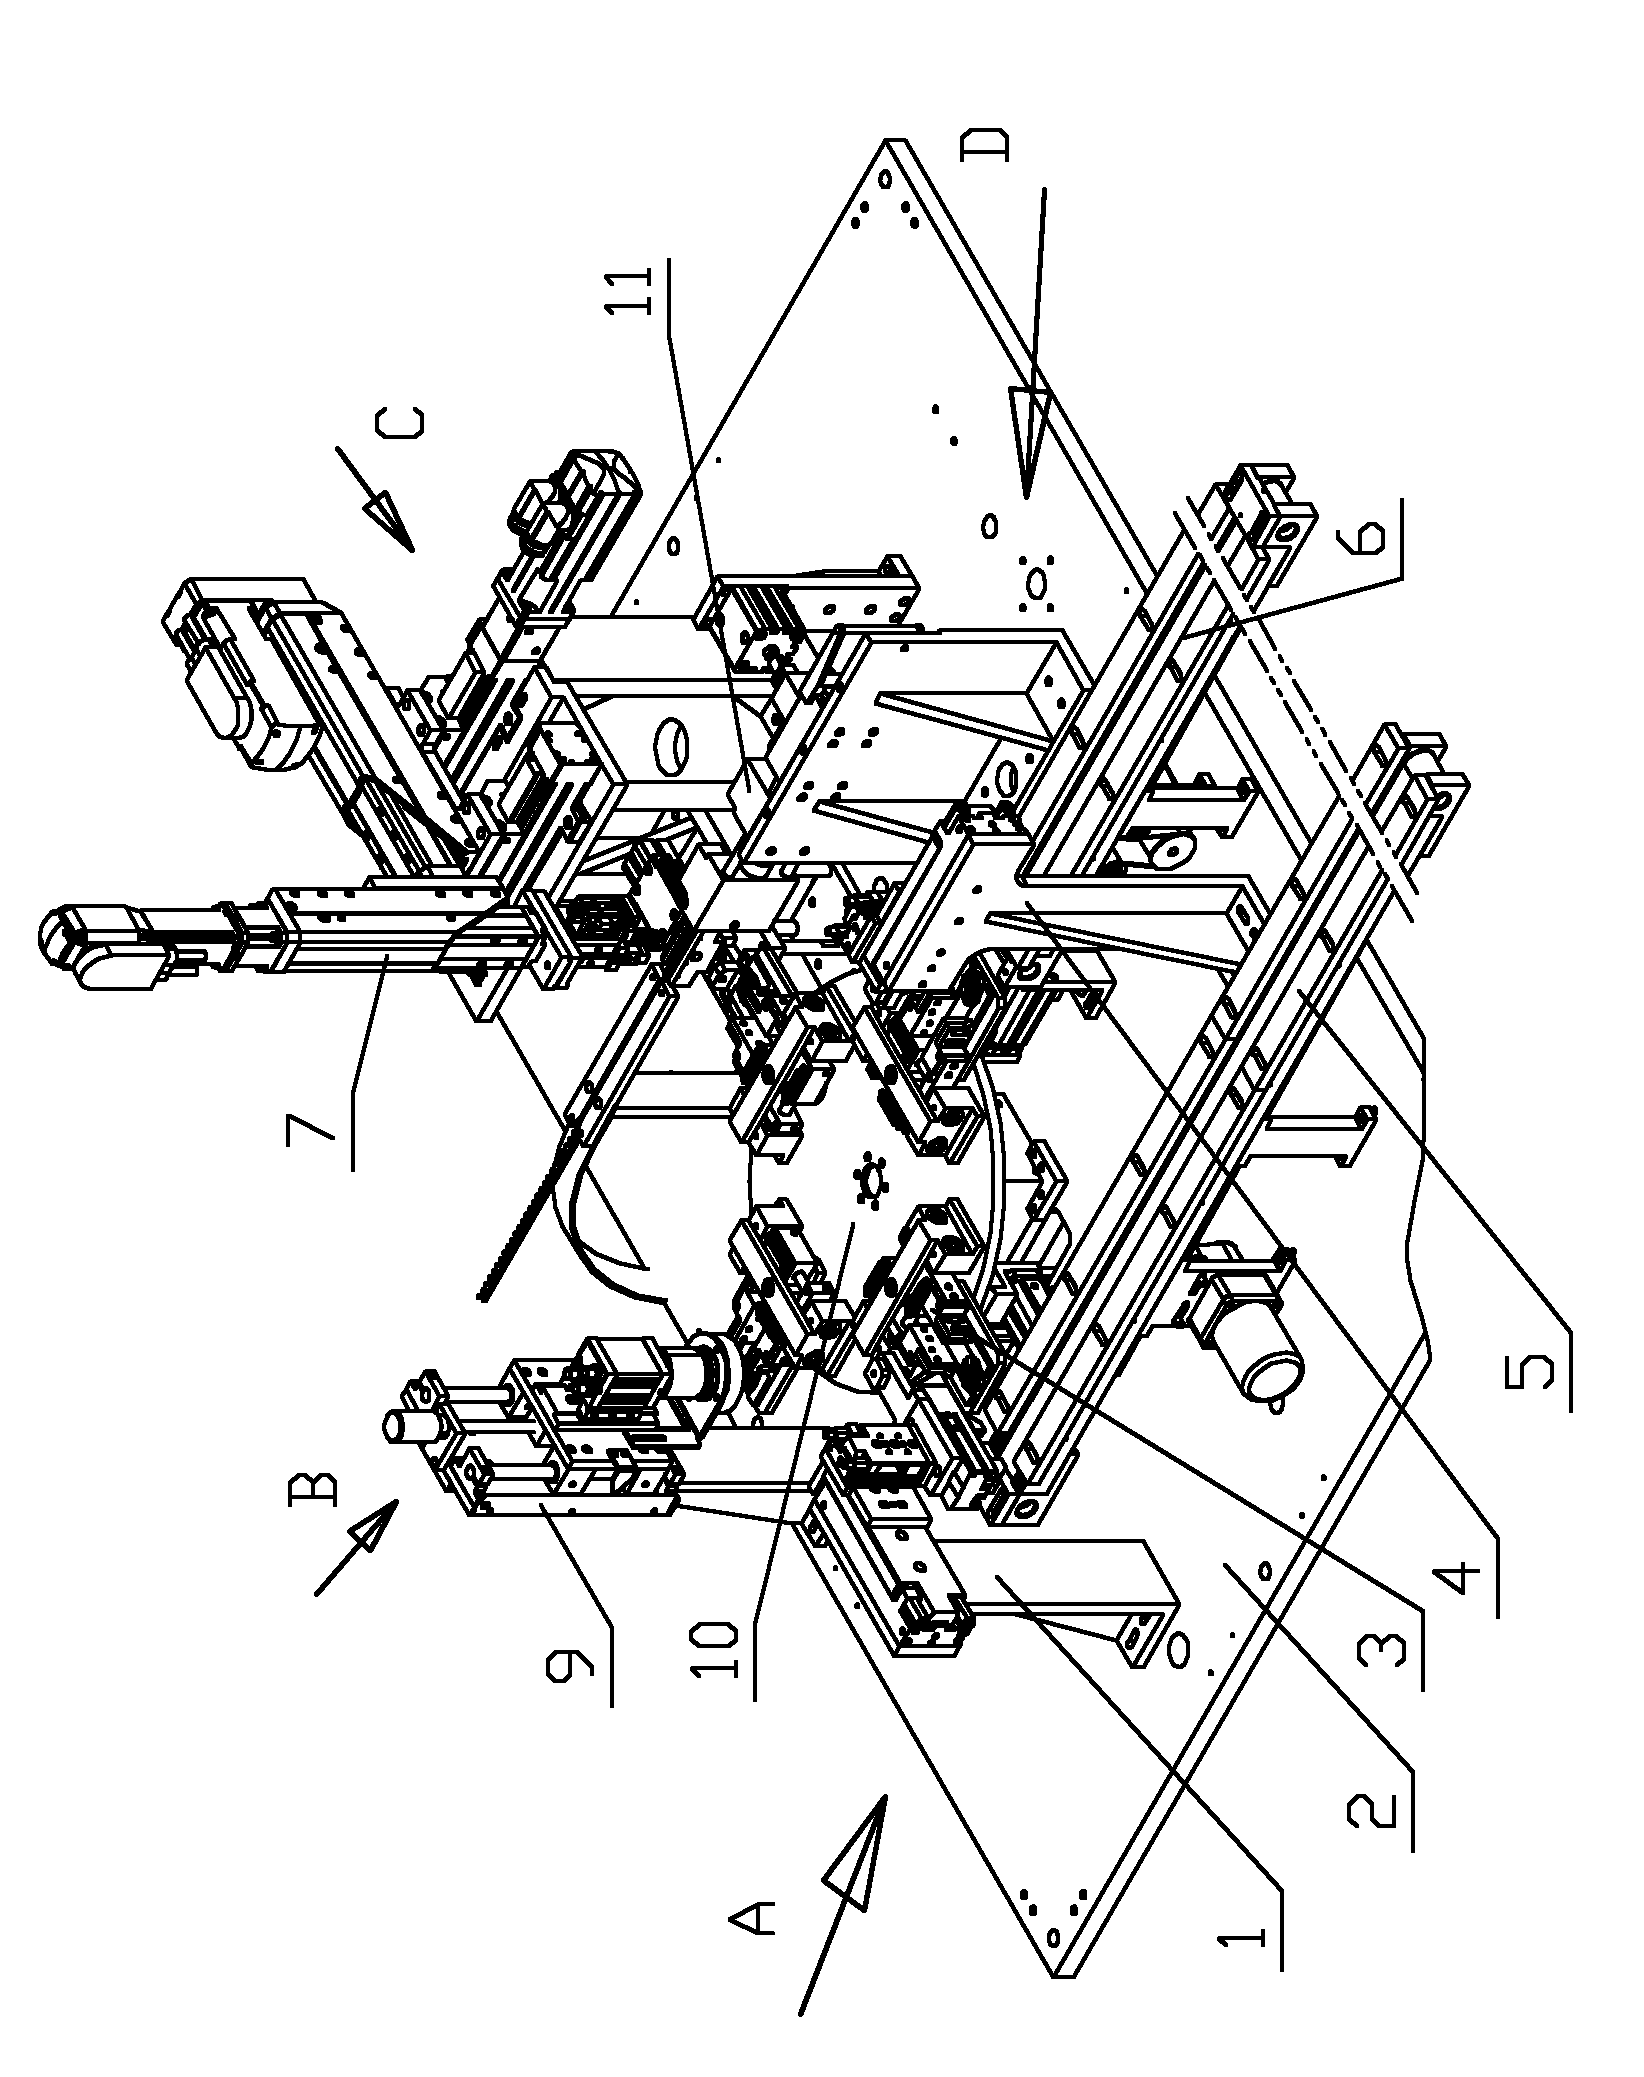 Automatic electric connector assembling method and automatic electric connector assembler